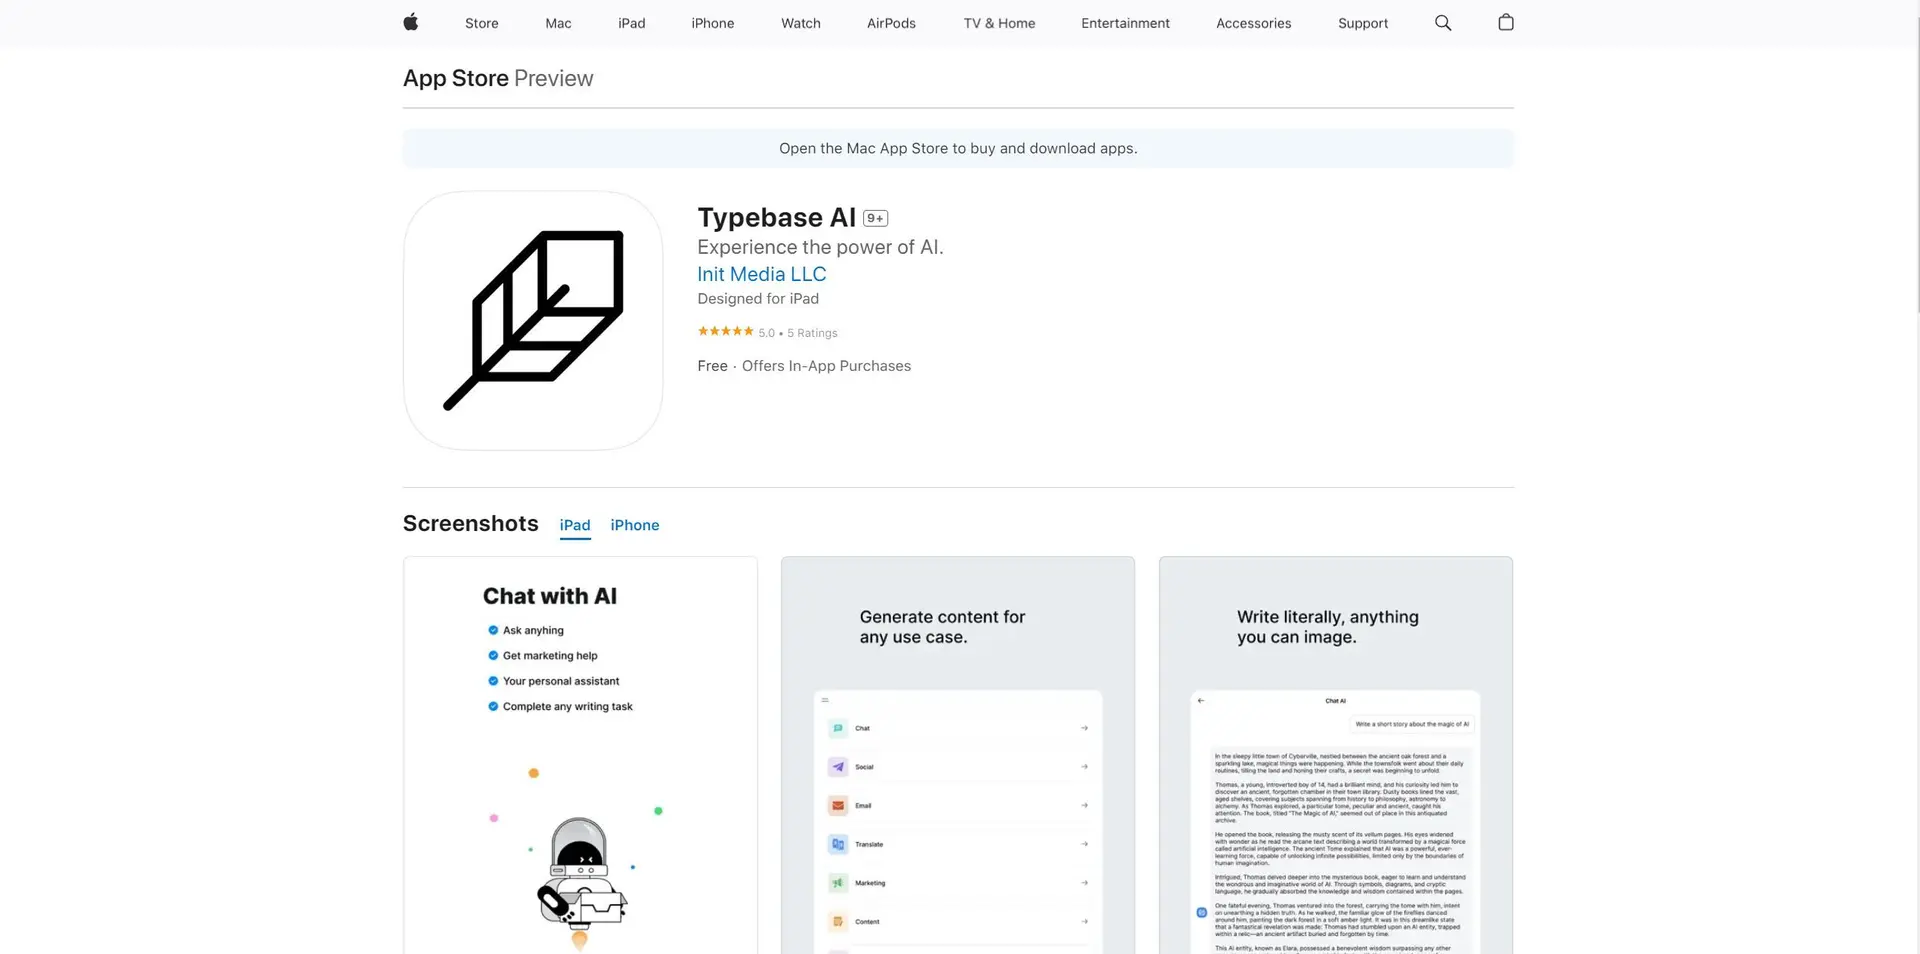 Typebase AIwebsite picture